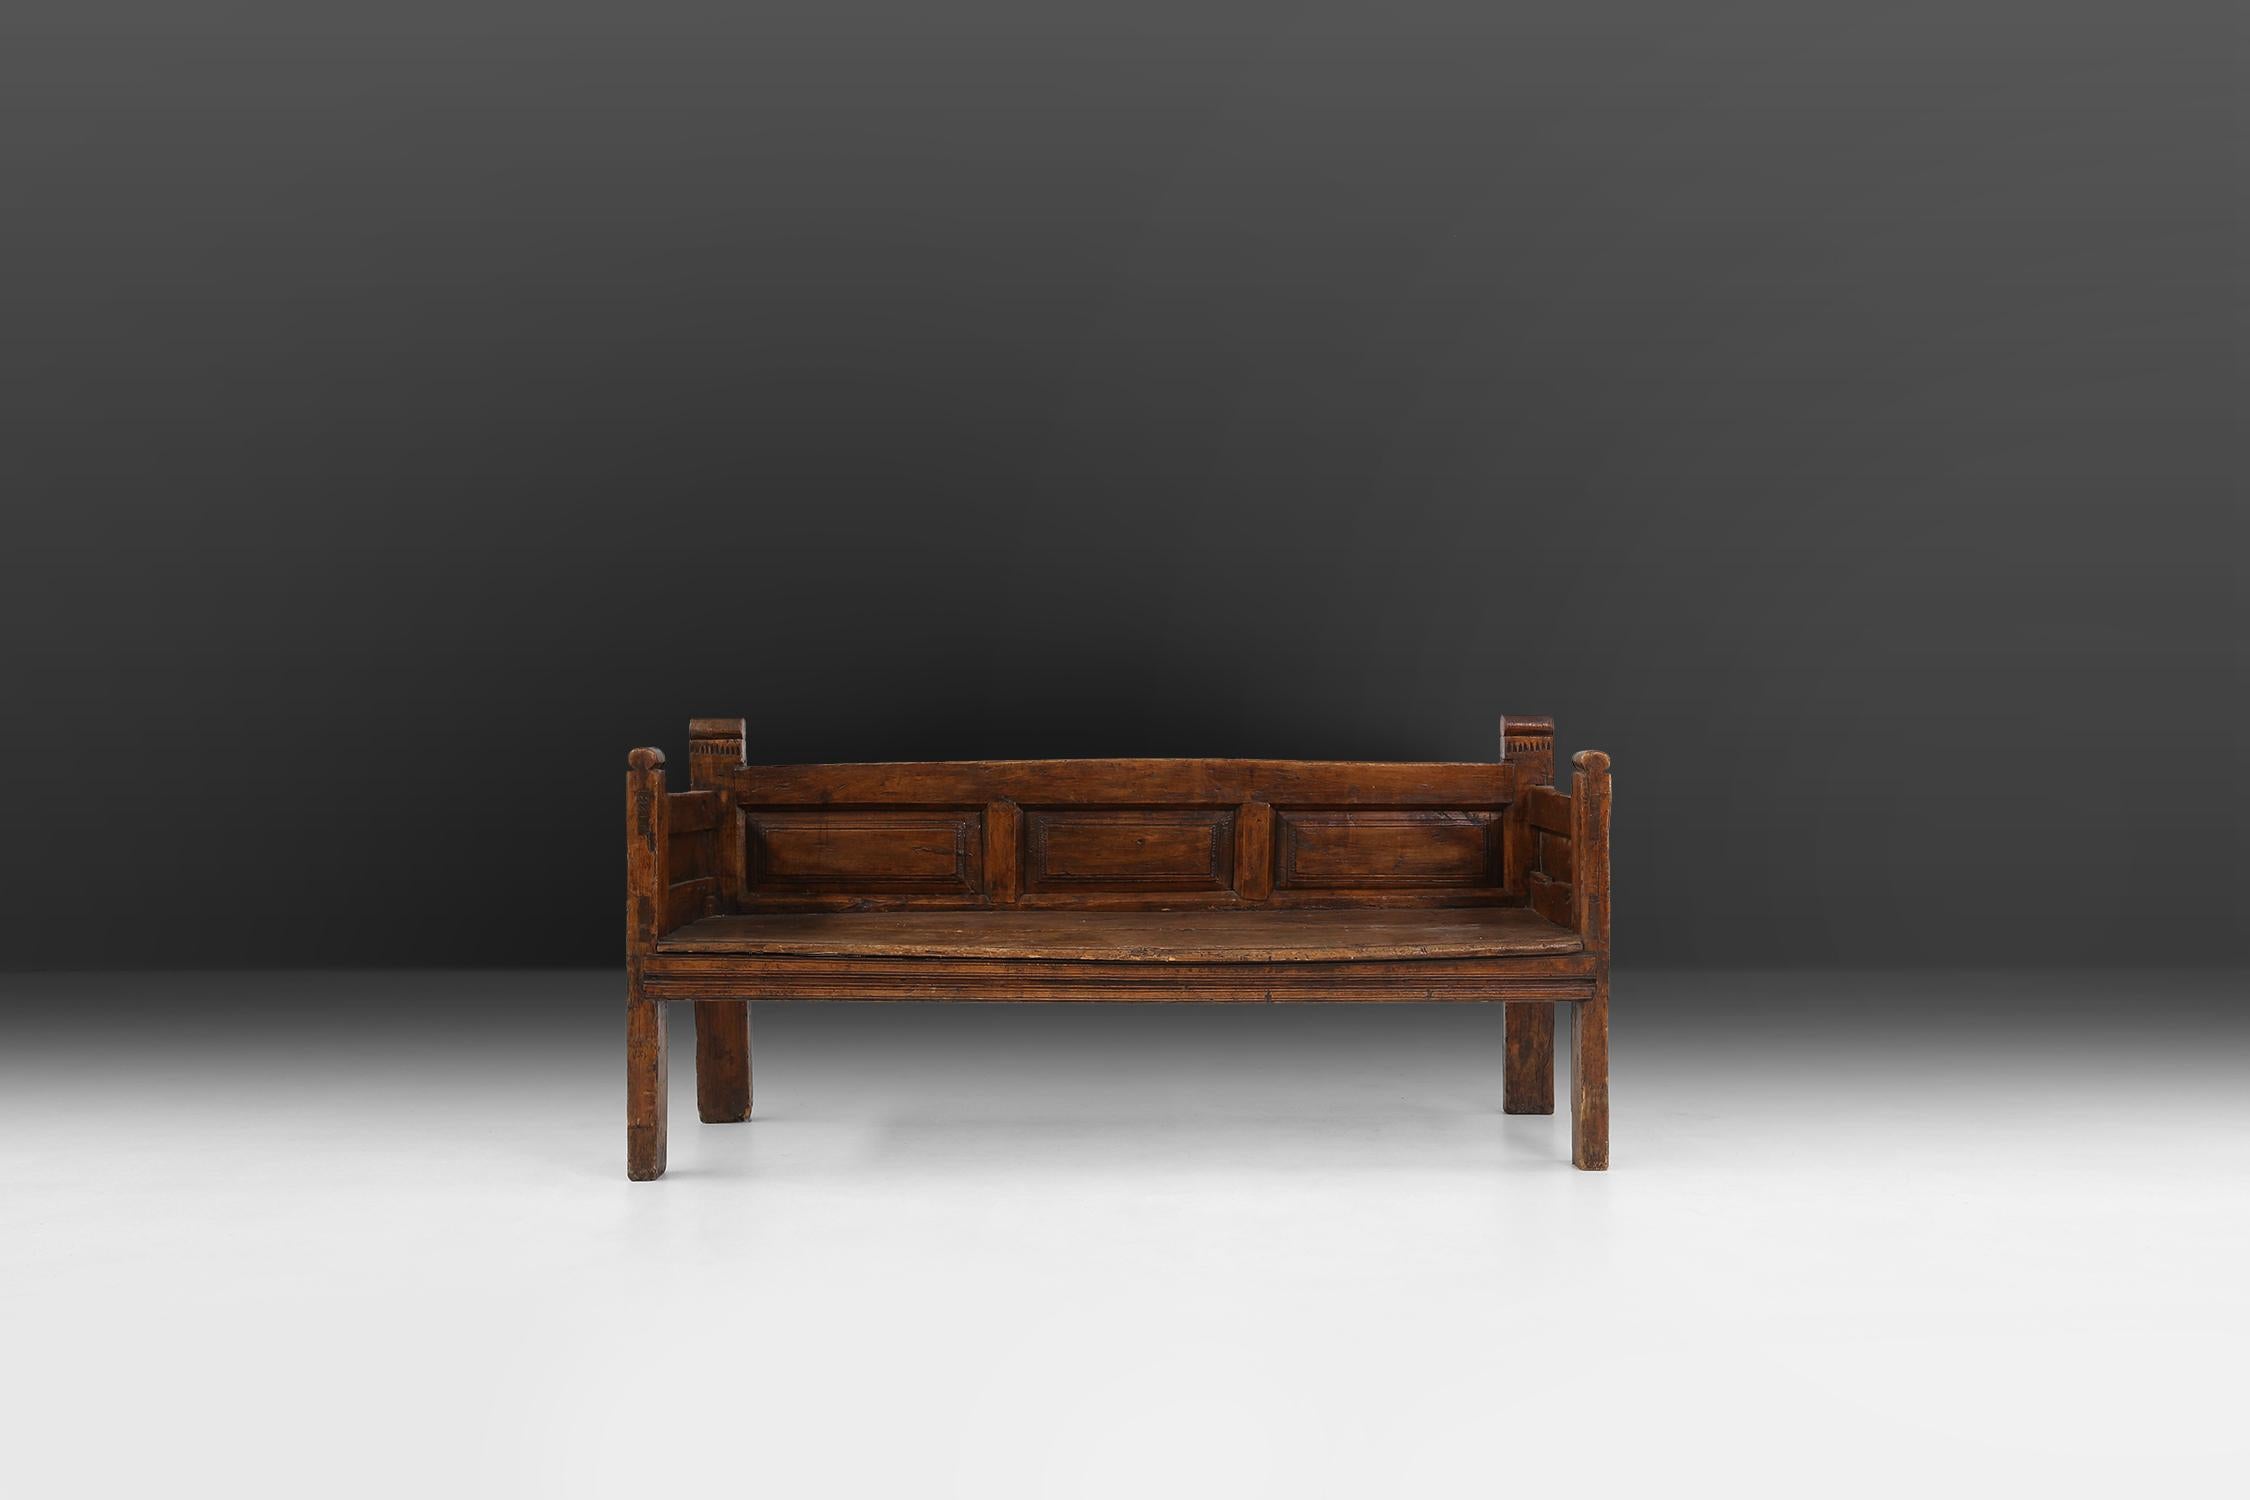 French handmade bench made around 1800. This three seater has very beautiful sculpted details in the solid wood. A beautiful patina on the wood creates a very rustic and Wabi-Sabi look.